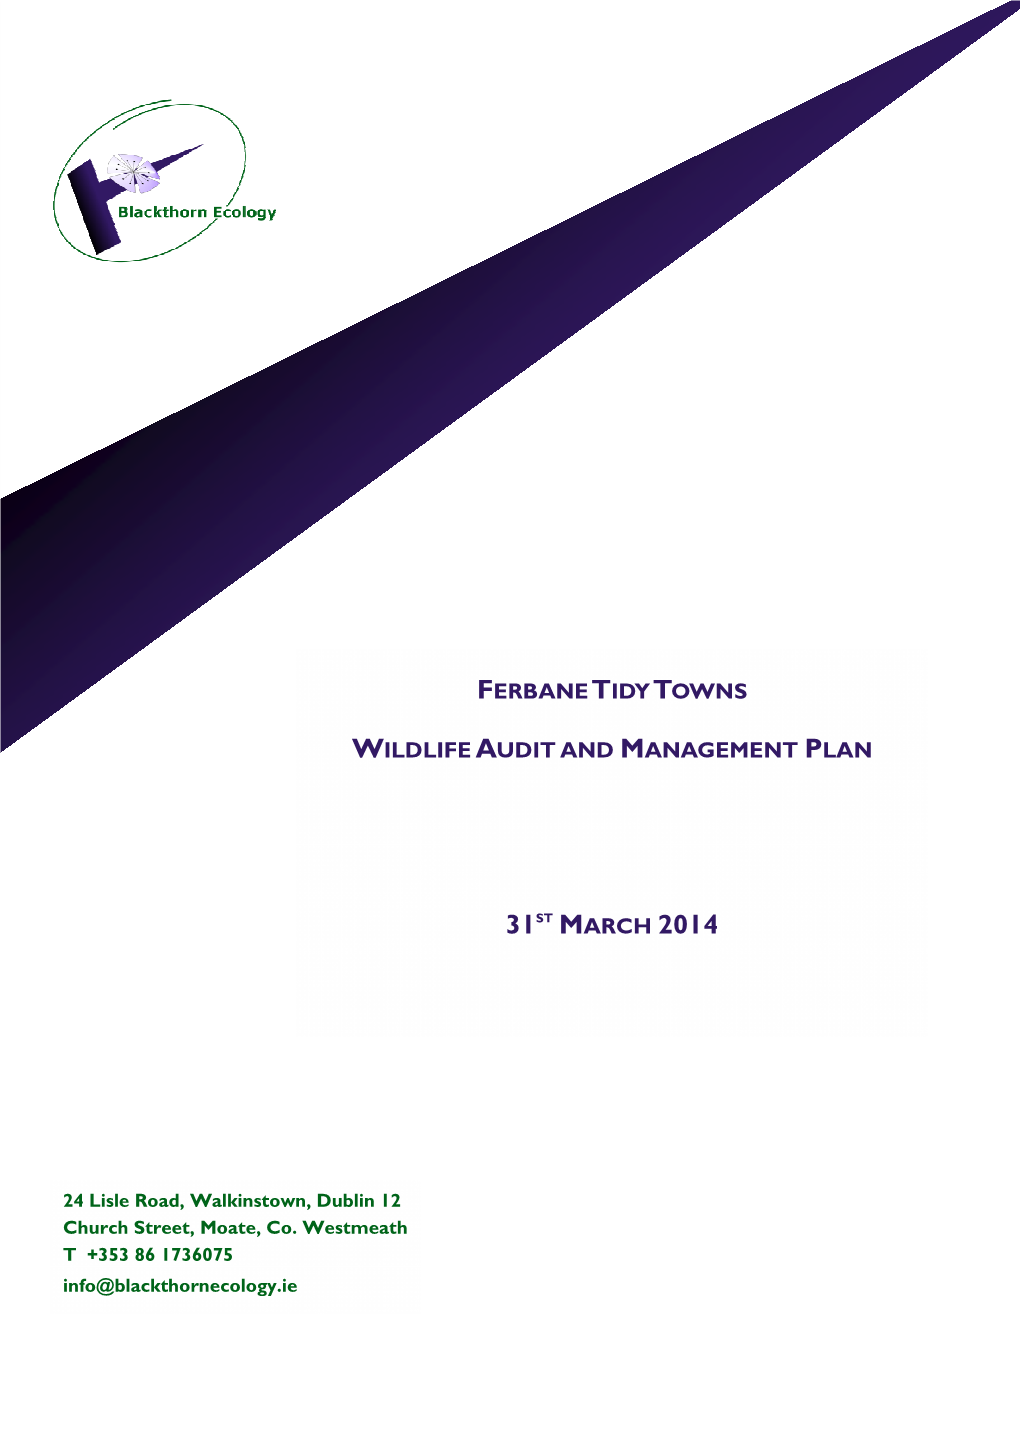 Ferbane Tidy Towns Wildlife Audit and Management Plan 31St March 2014